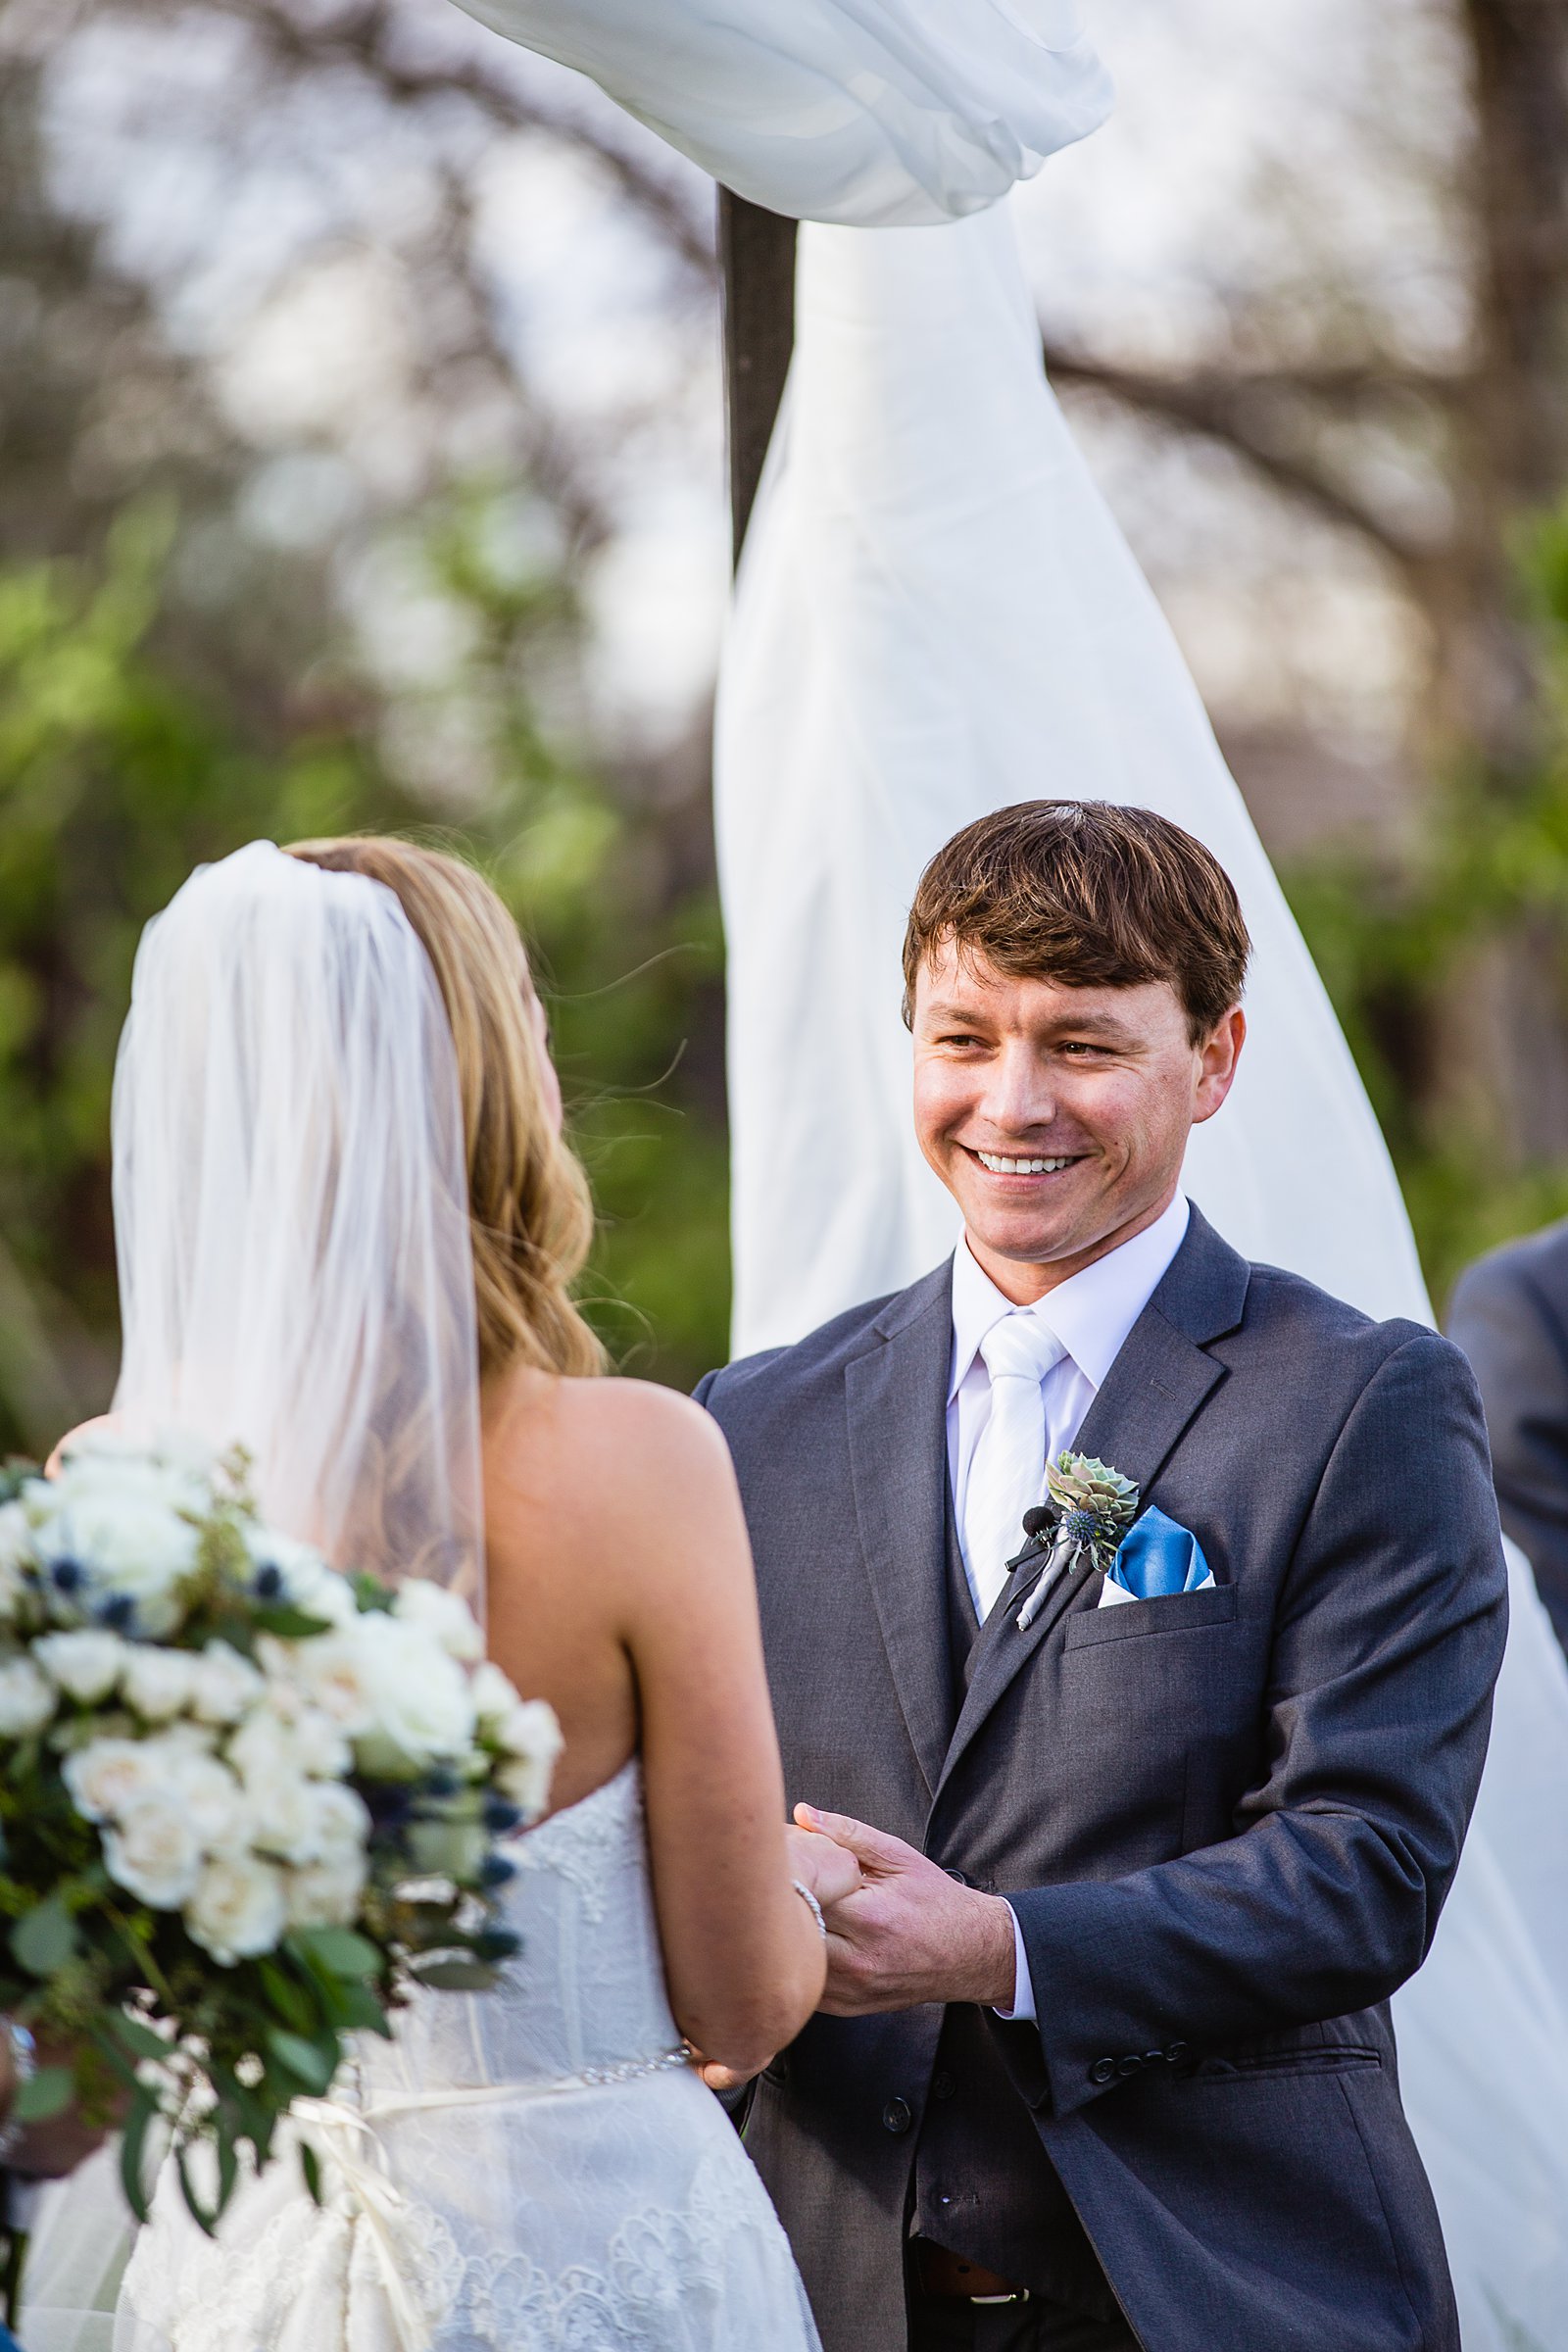 Groom looking at his bride during their wedding ceremony at Venue At The Grove by Phoenix wedding photographer PMA Photography.